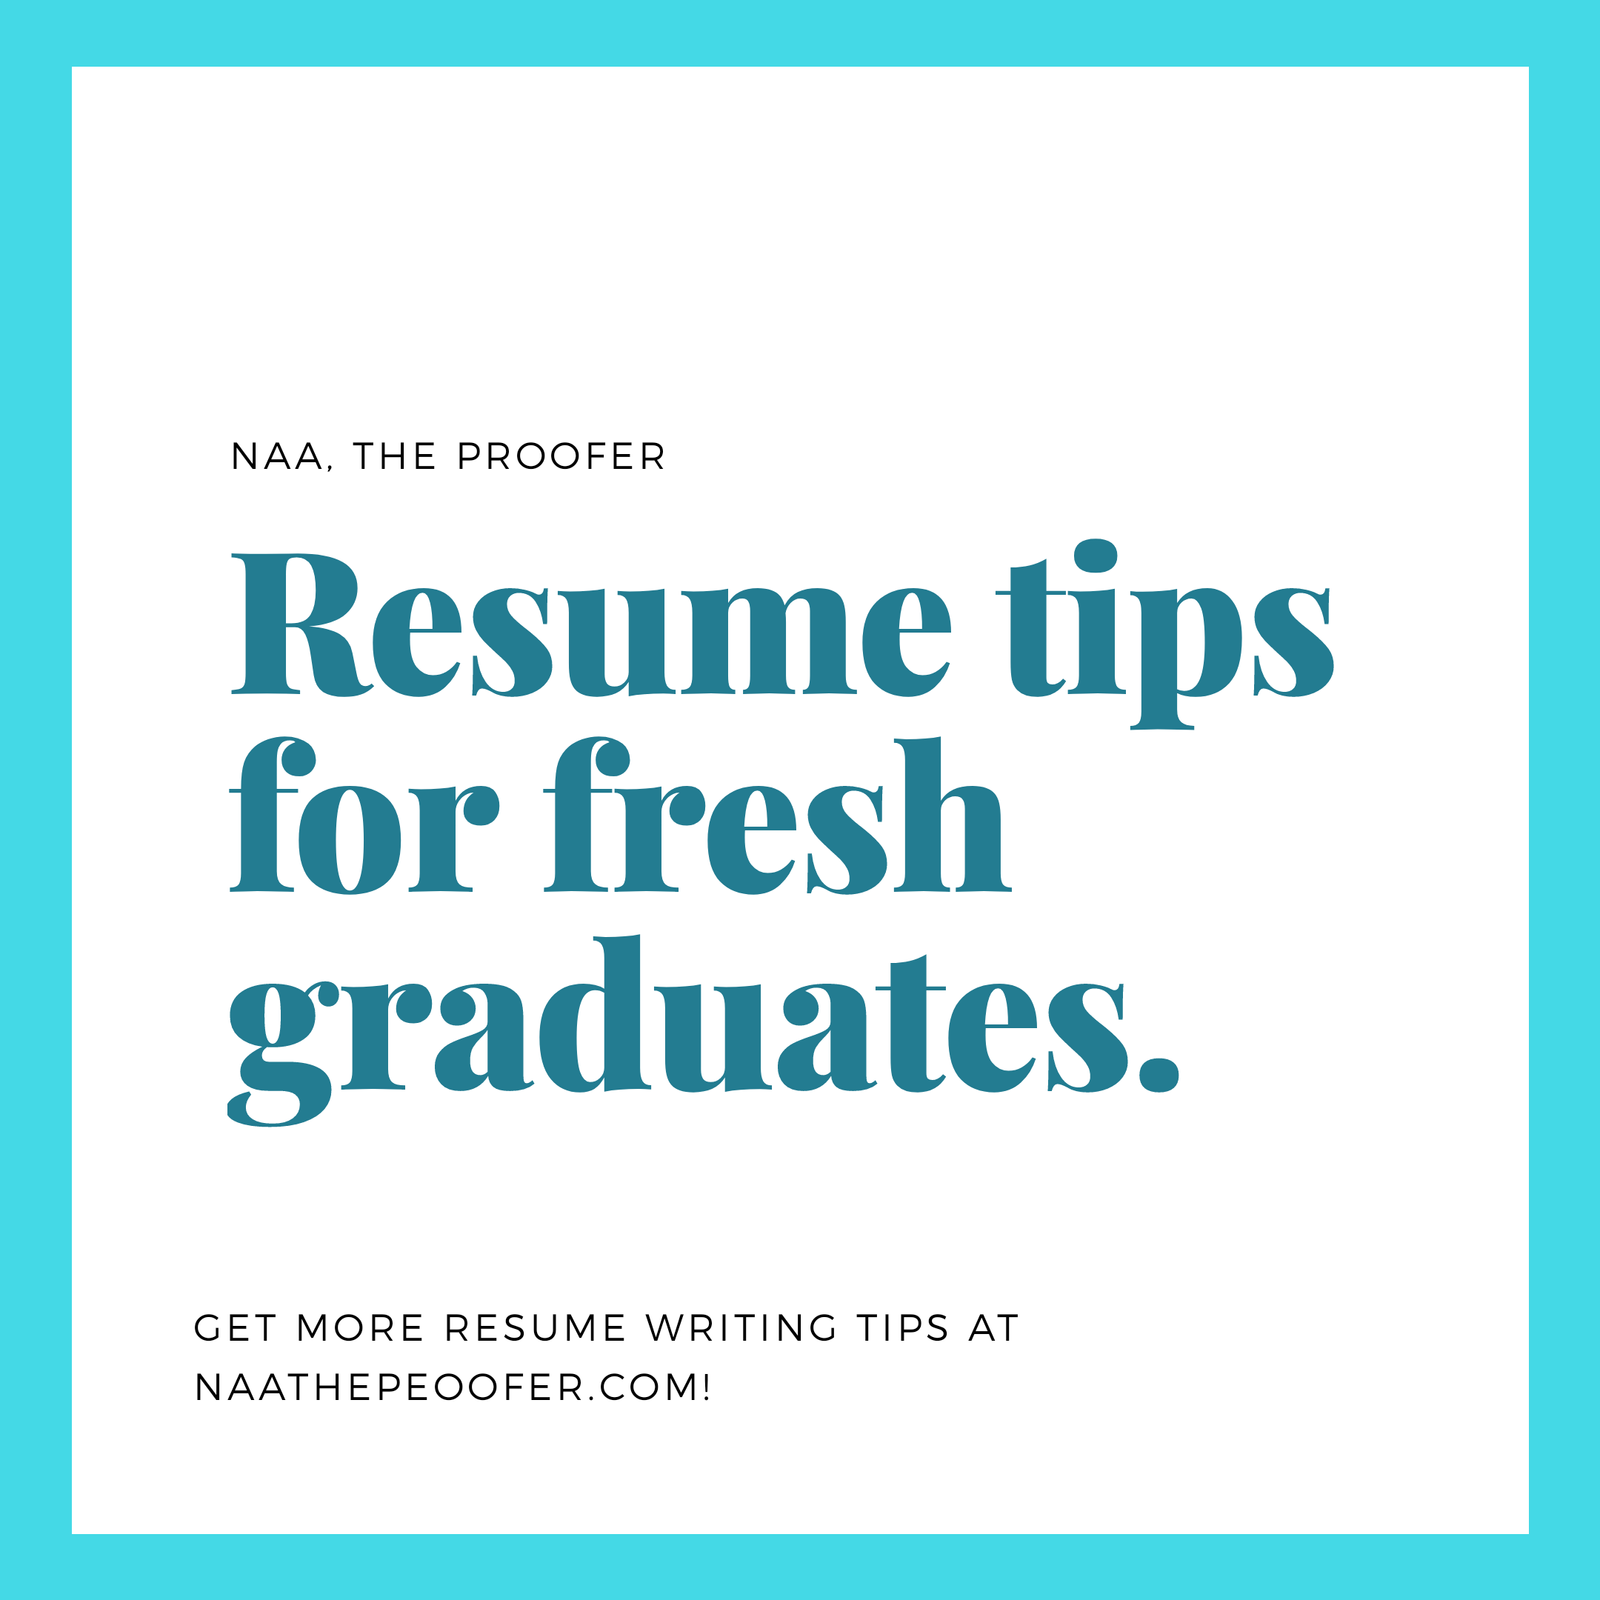 RESUME TIPS FOR STUDENTS AND FRESH GRADUATES